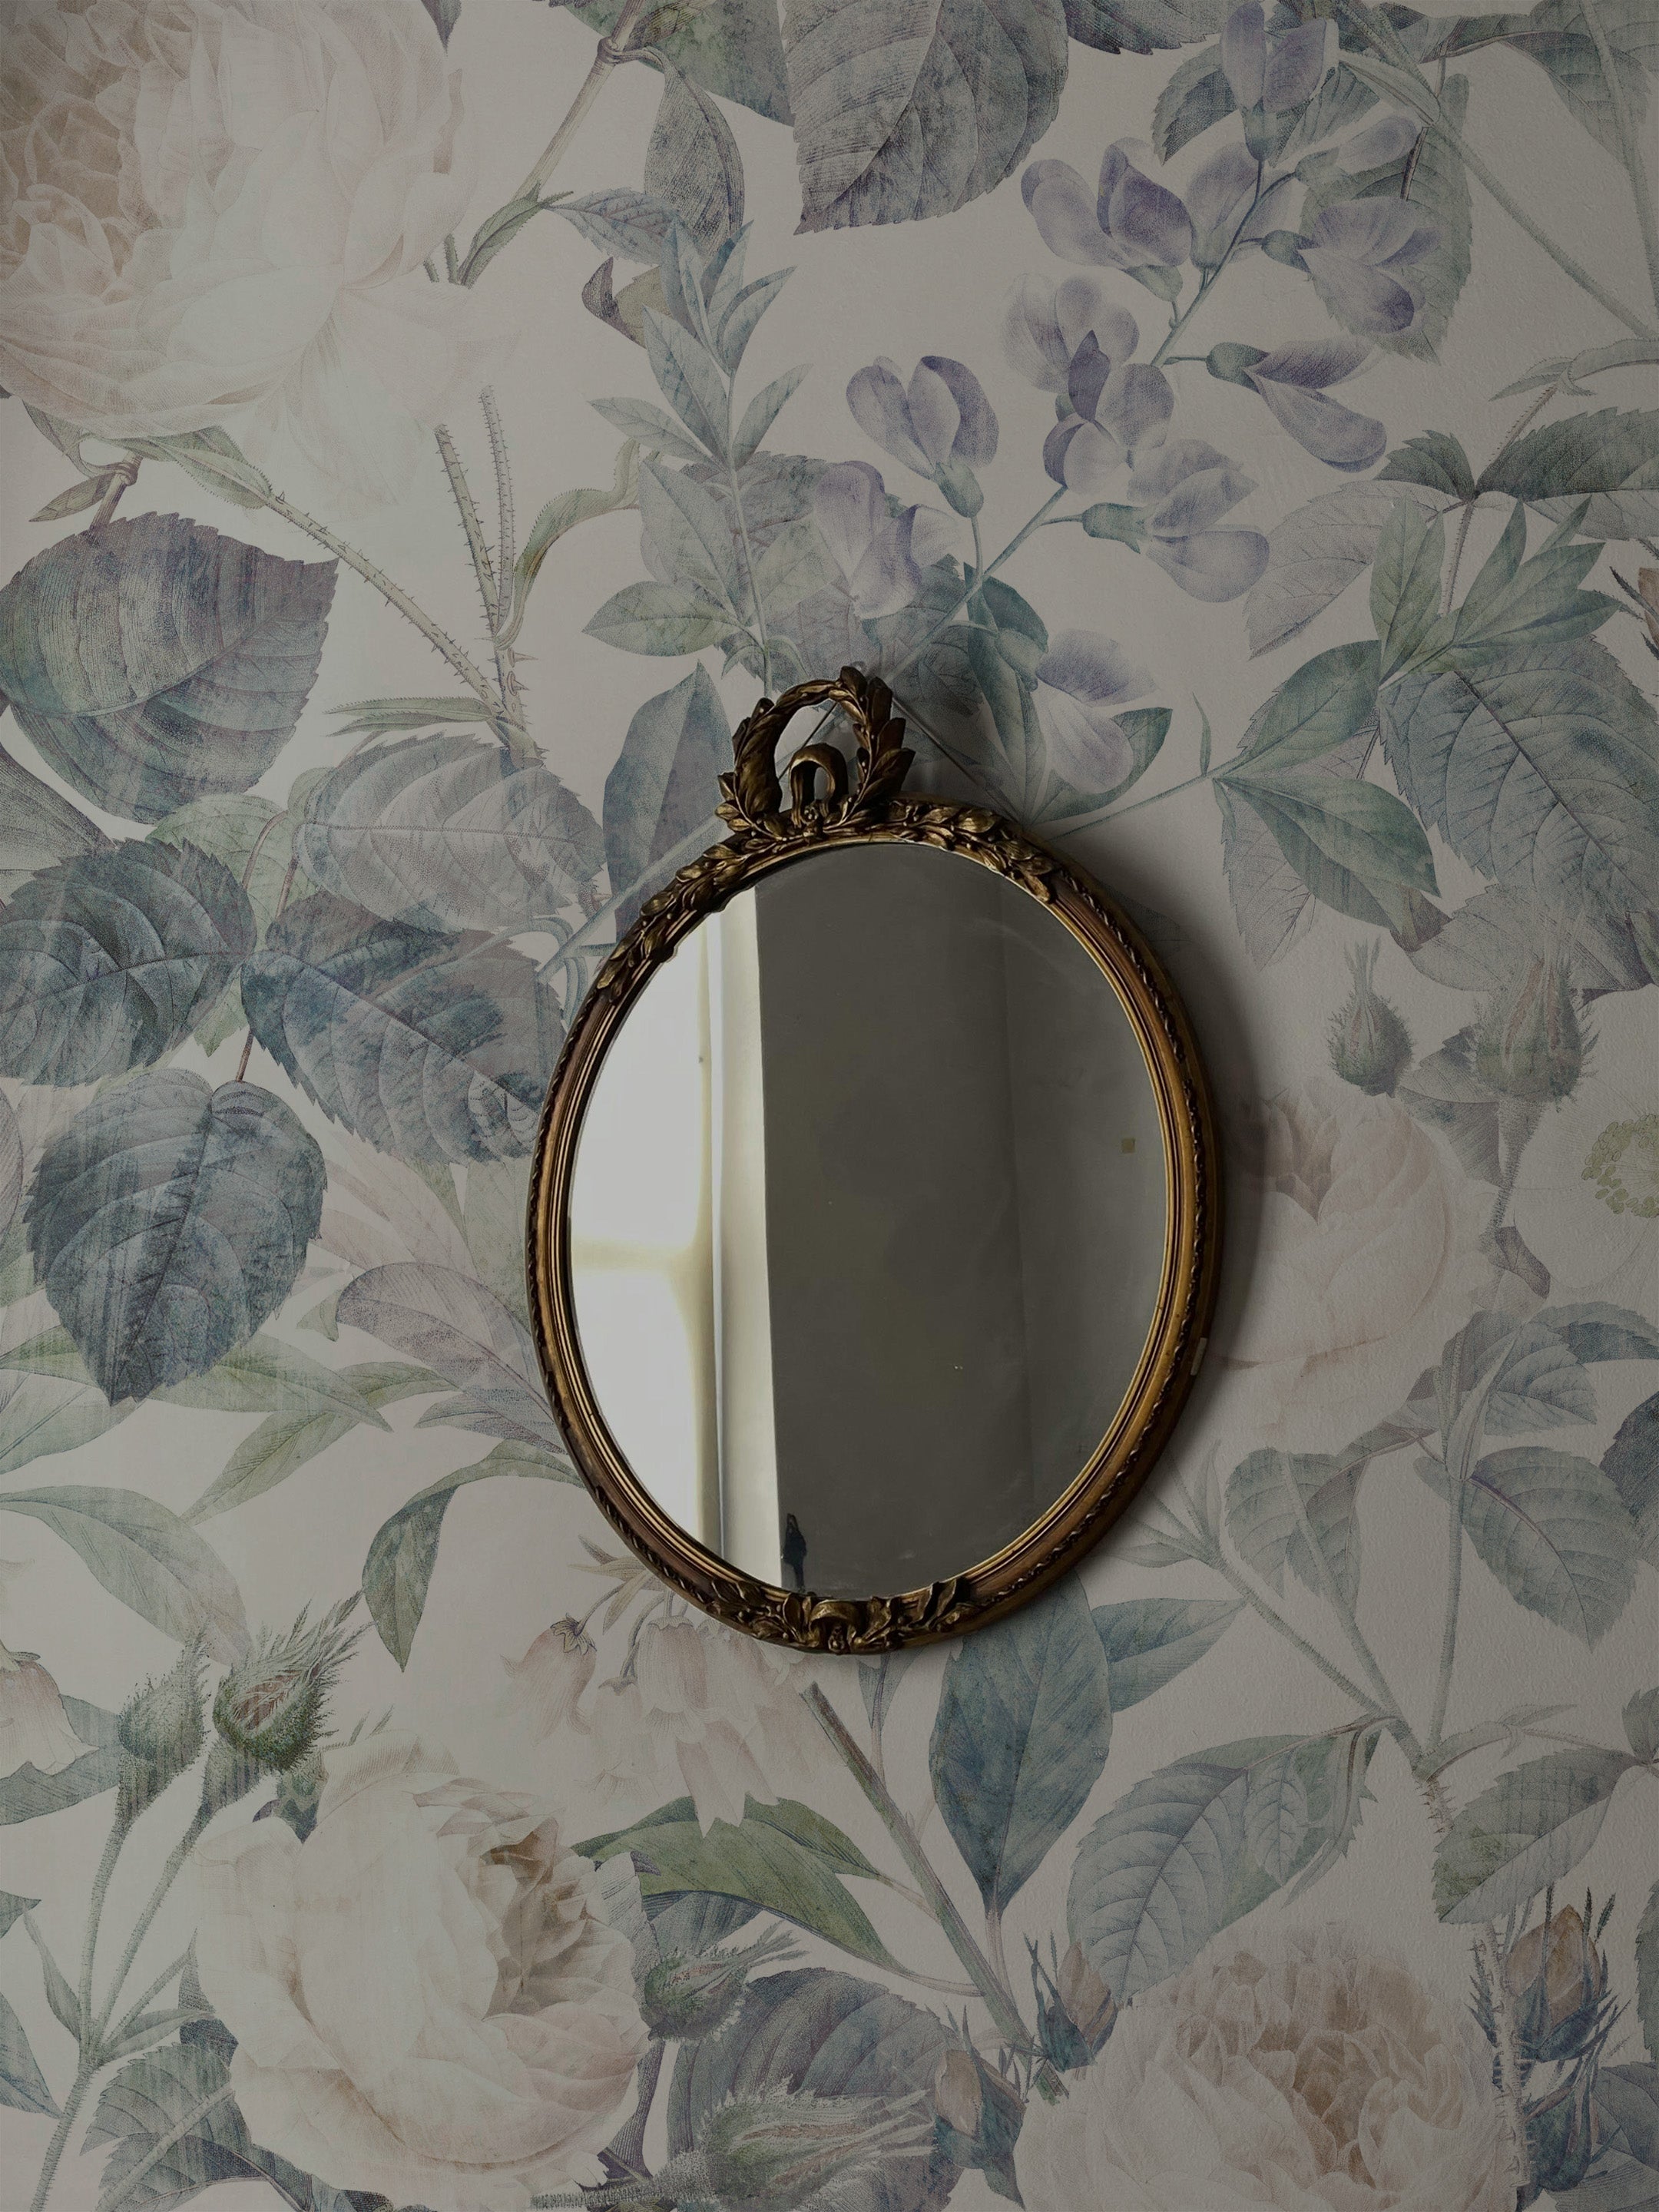 Detail of the Faded Luxury Wallpaper with a vintage ornate mirror reflecting its large, soft-hued floral patterns. The wallpaper's faded effect on the flowers and leaves provides a timeless elegance, contributing to a sophisticated and peaceful room decor.